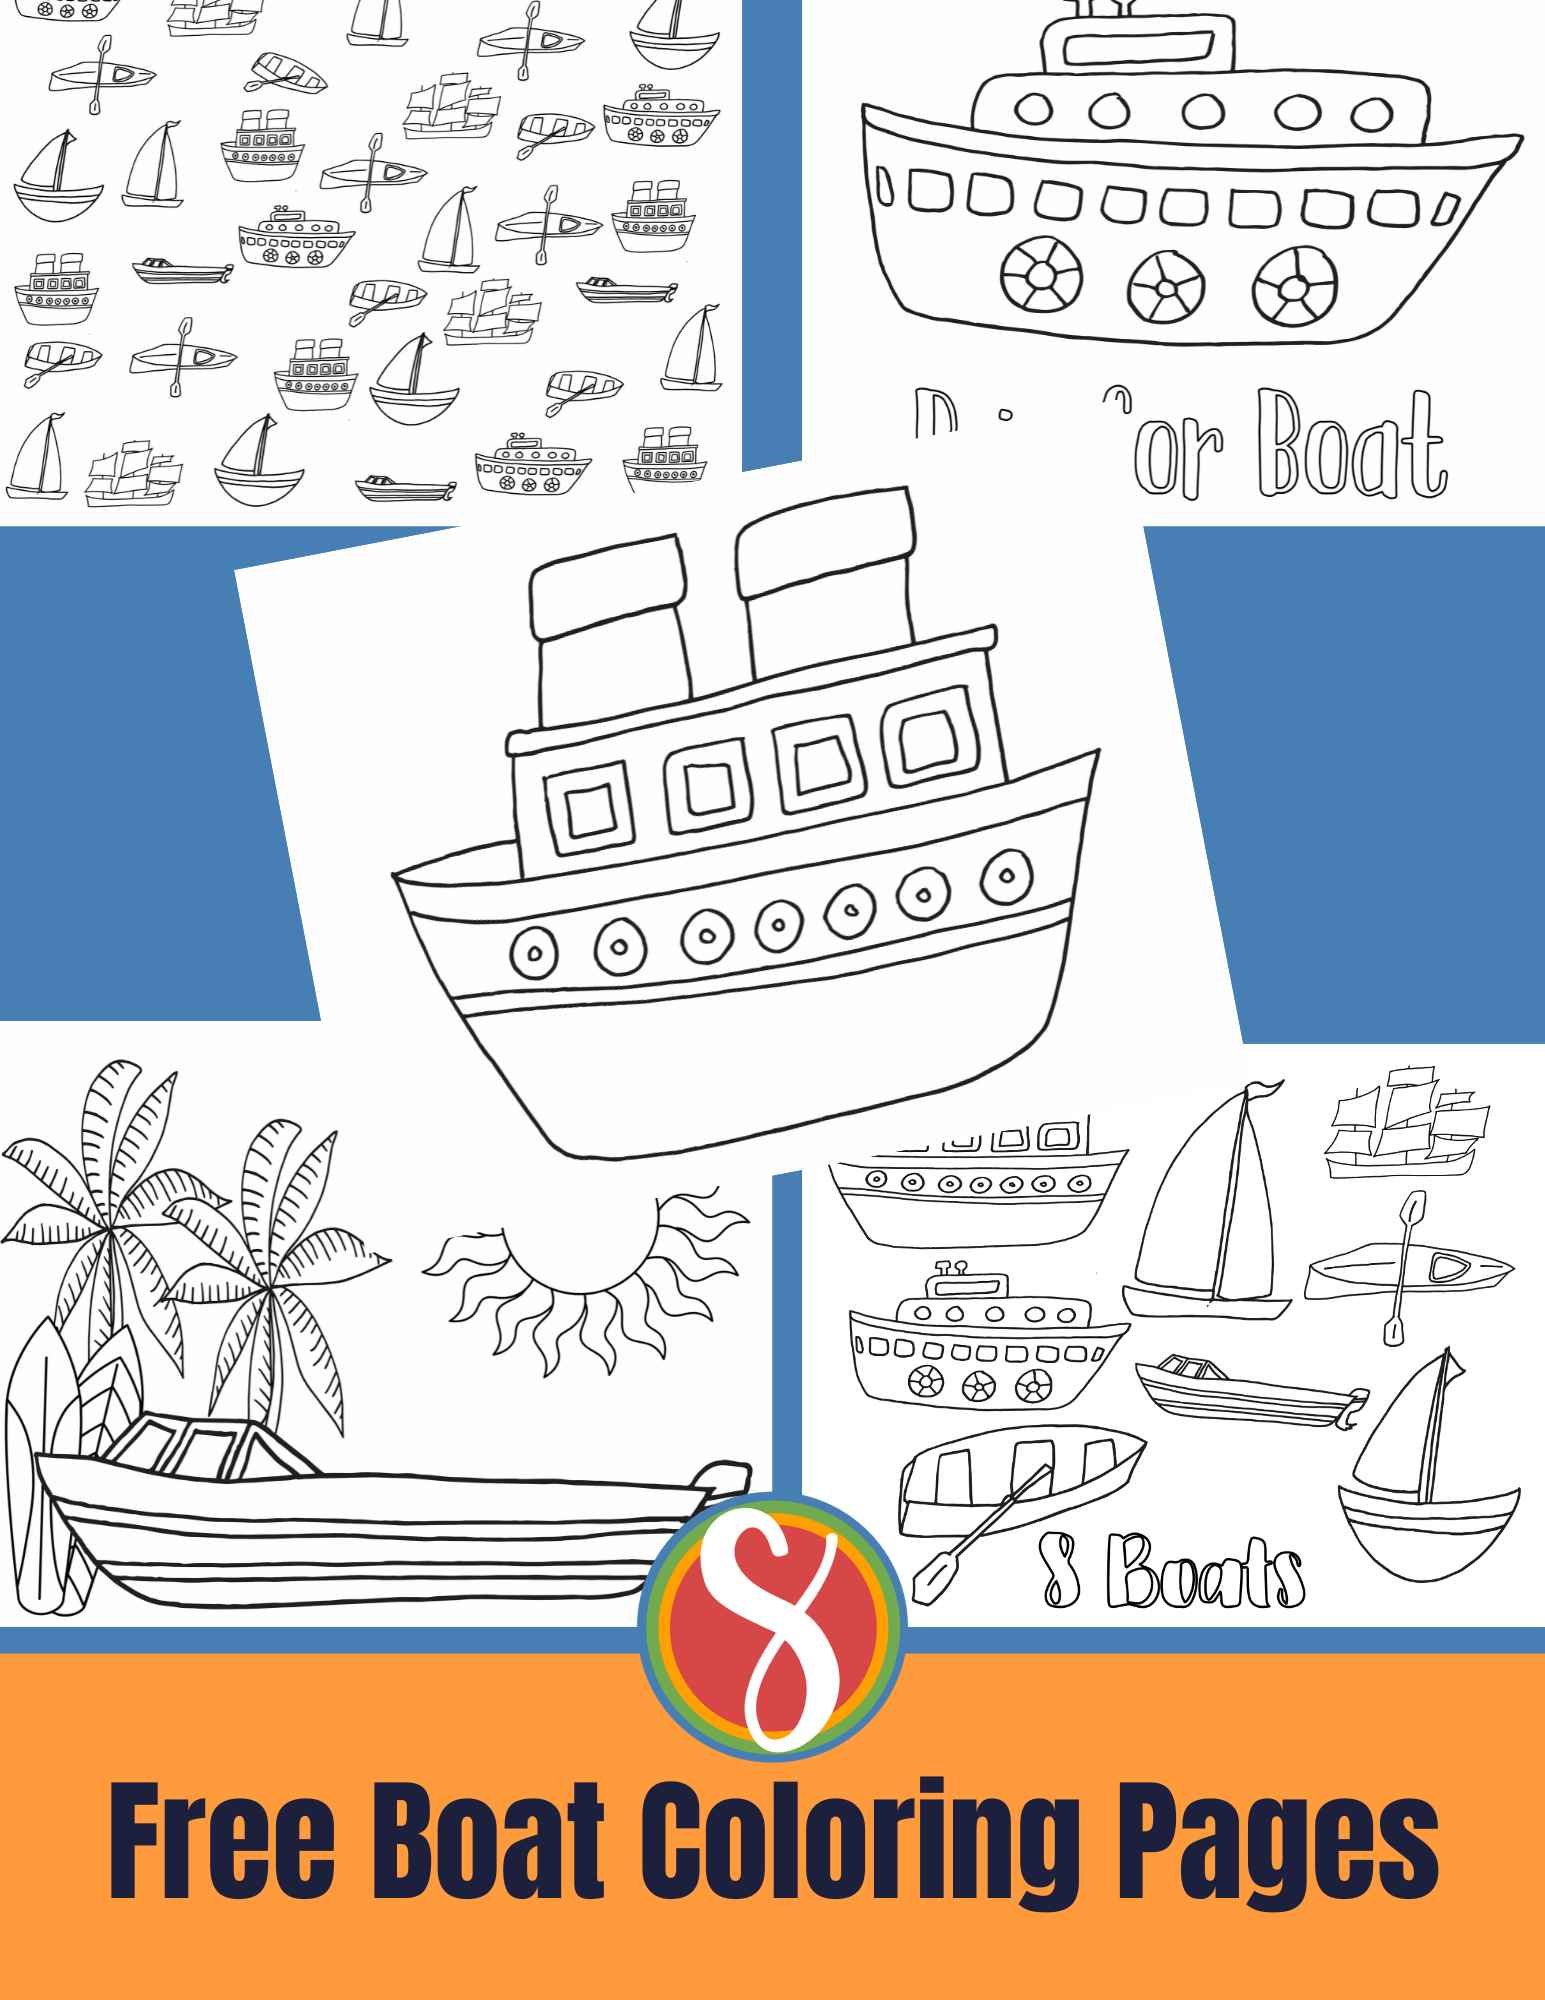 collage of boat coloring pages on a blue background